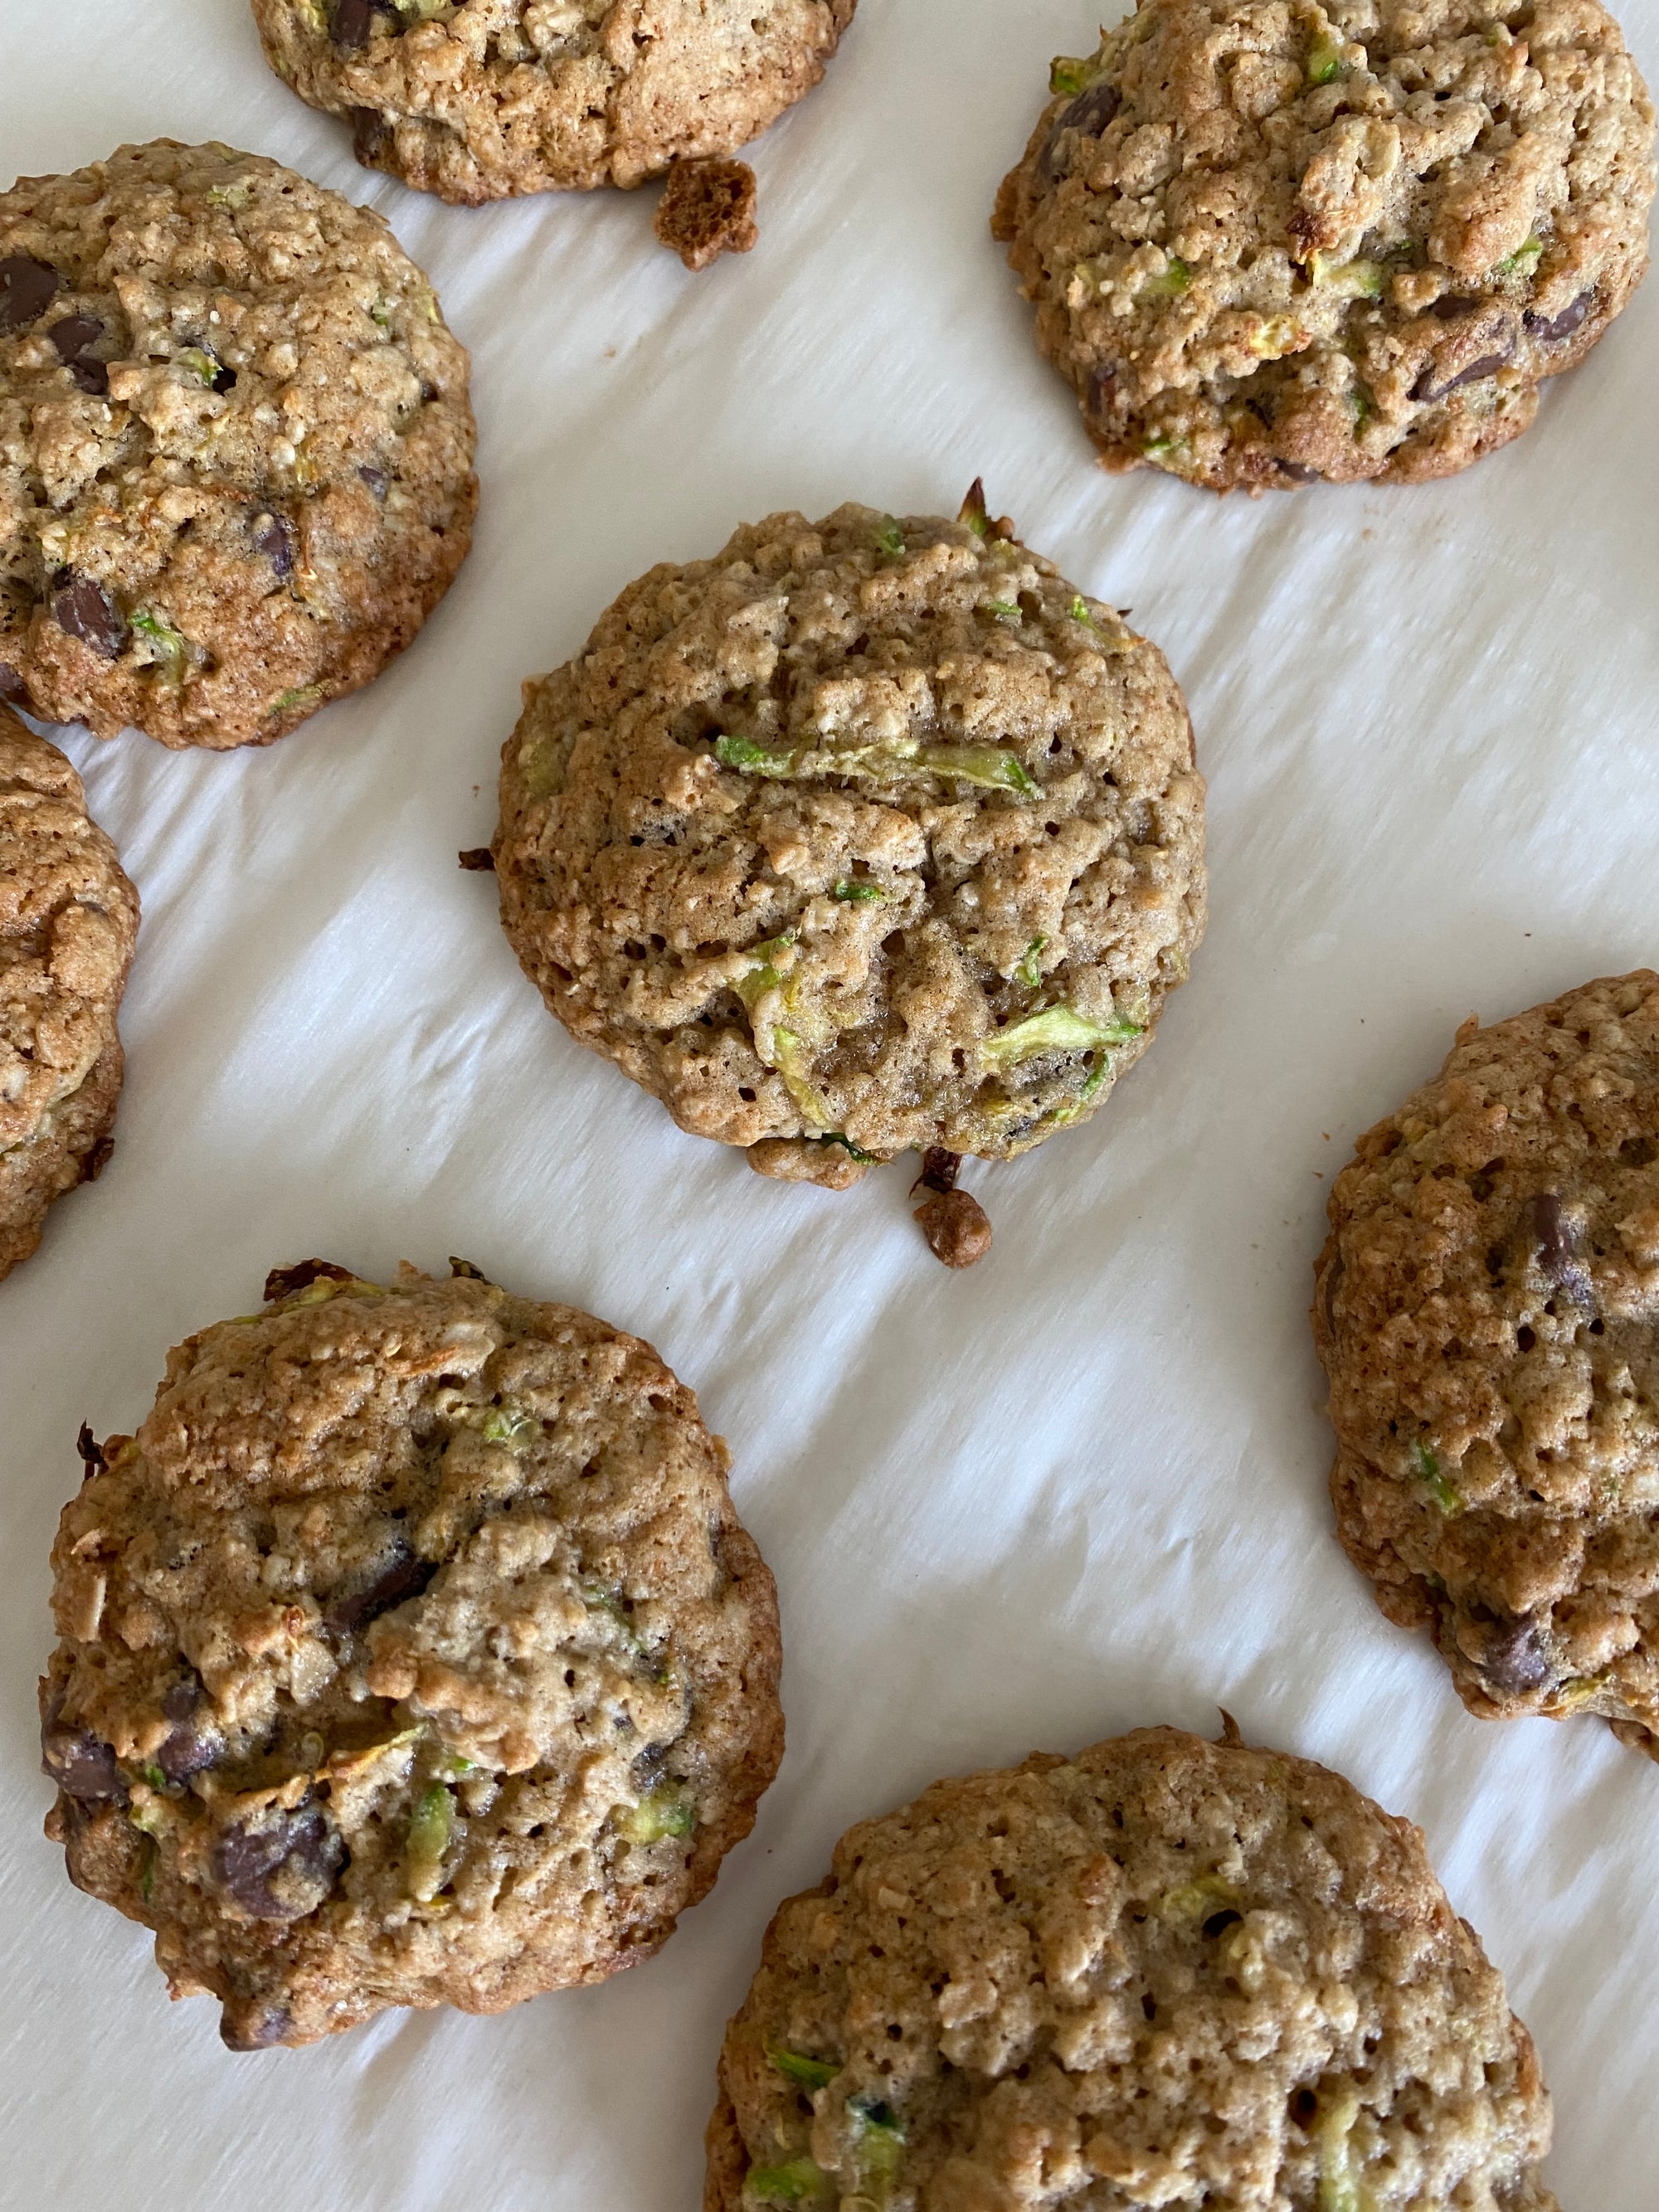 Zucchini in a Cookie? Yup and You'll Love Them!